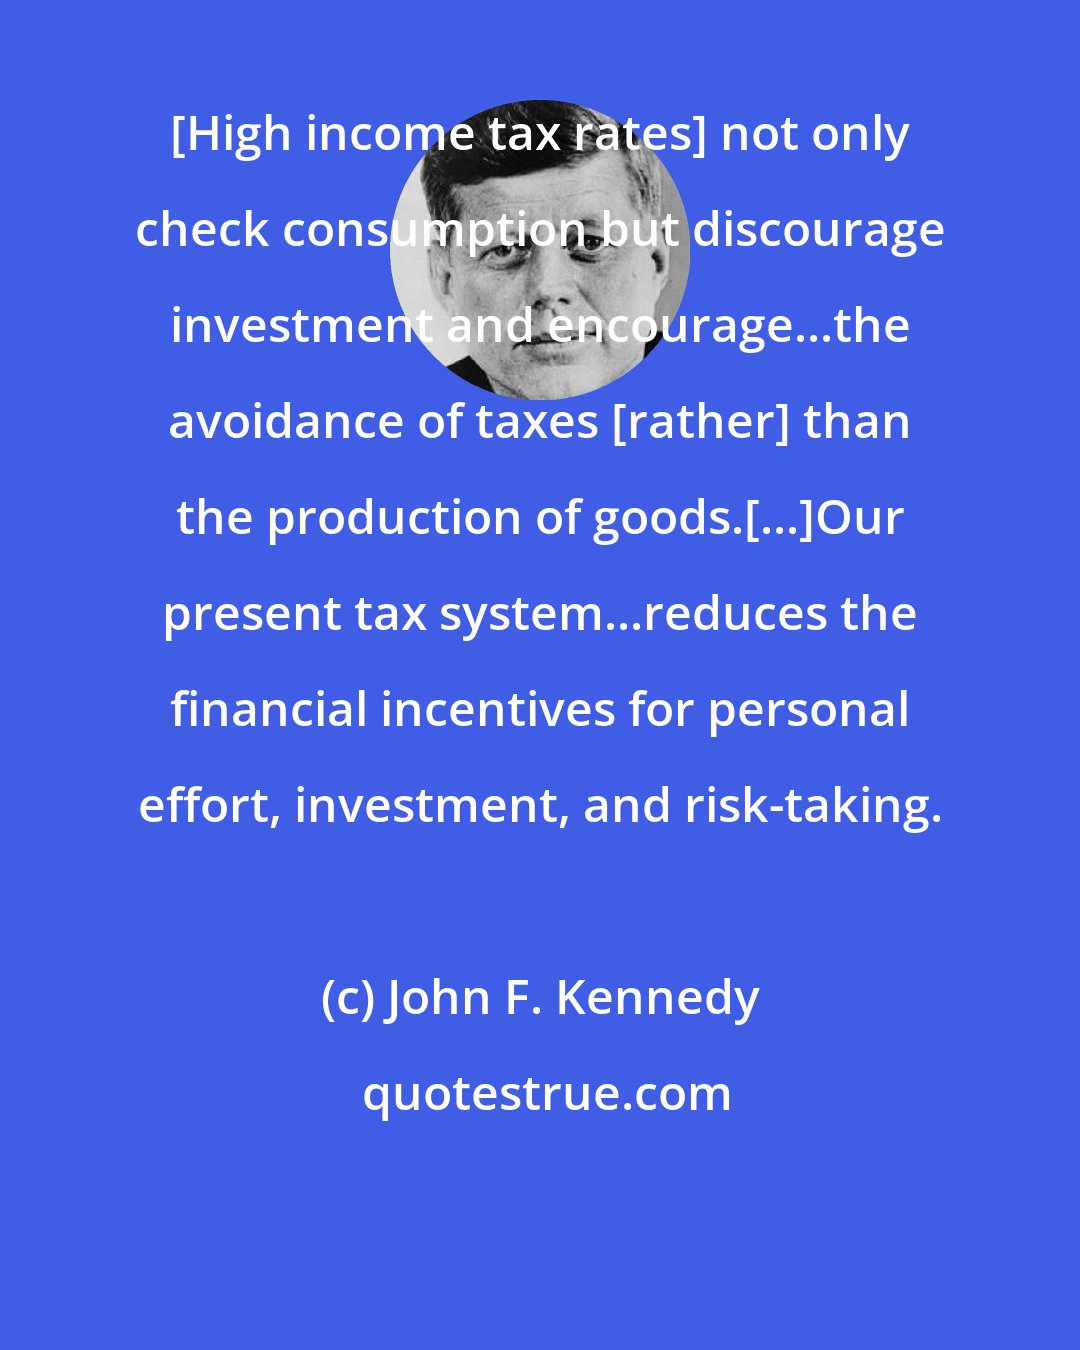 John F. Kennedy: [High income tax rates] not only check consumption but discourage investment and encourage...the avoidance of taxes [rather] than the production of goods.[...]Our present tax system...reduces the financial incentives for personal effort, investment, and risk-taking.